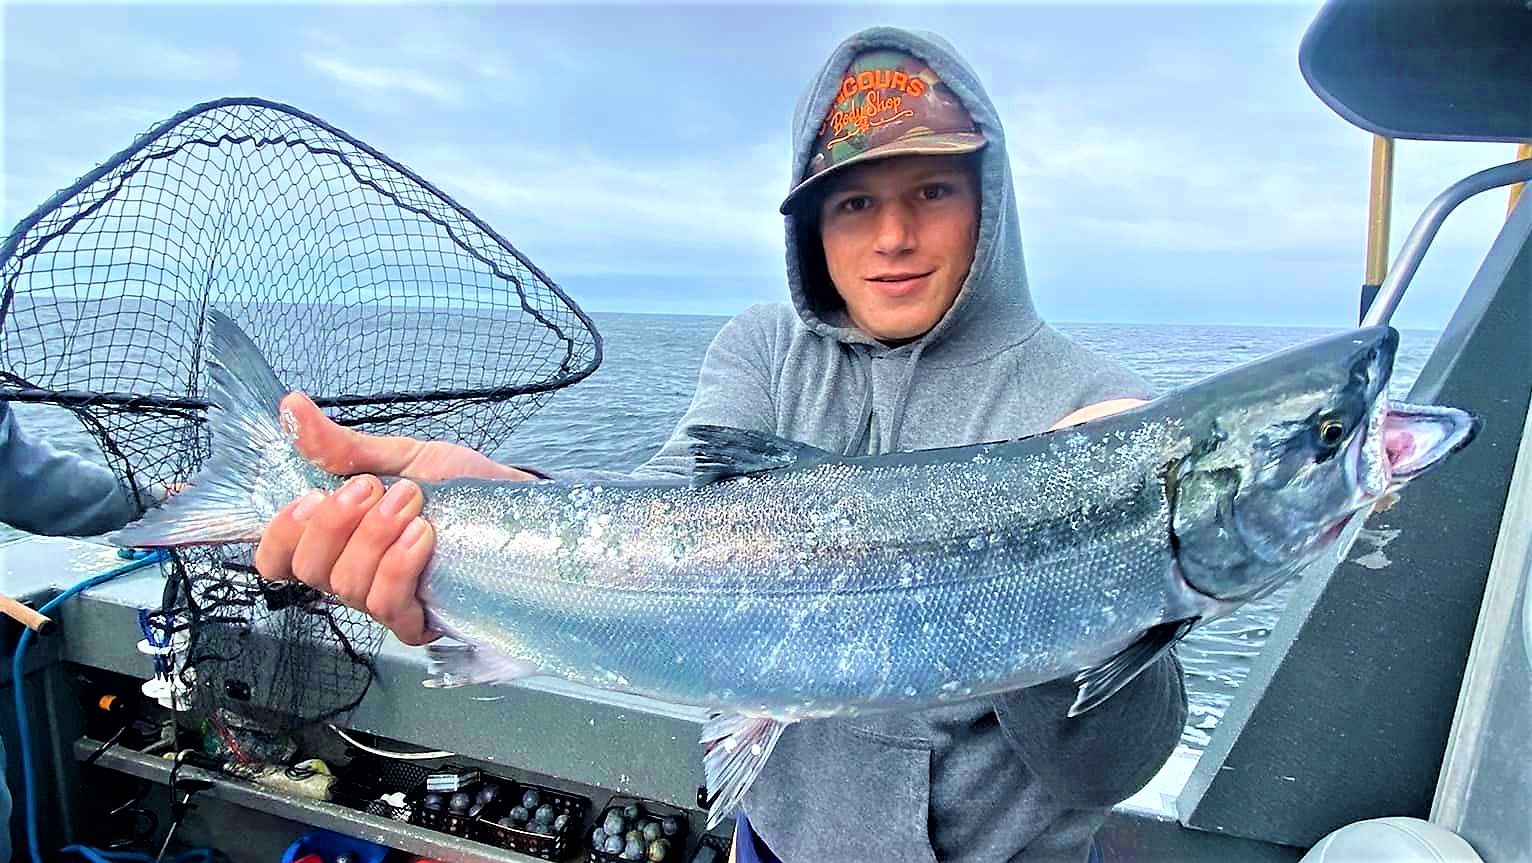 Ocean Obsession Guide Service Oregon Fishing Charters Charter | 8 Hour Shared Trip  fishing Offshore